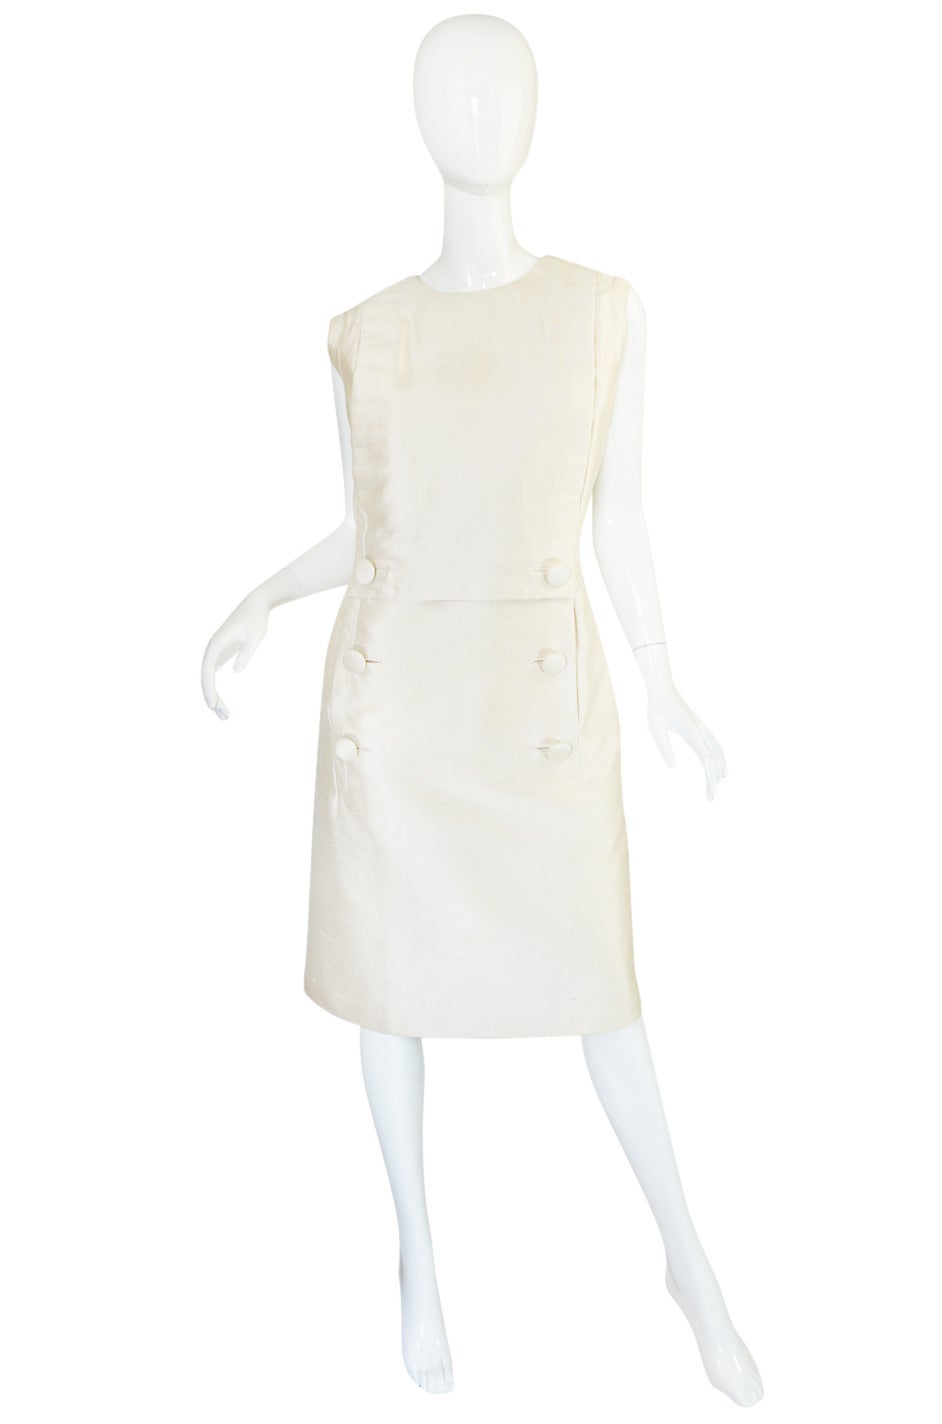 This dress and coat set in a rich cream silk is extraordinary. After much research I believe it to be based on the Spring 1960, Yves Saint Laurent for Christian Dior collection. You can see a striking similarity to the cut, collar and buttons of the